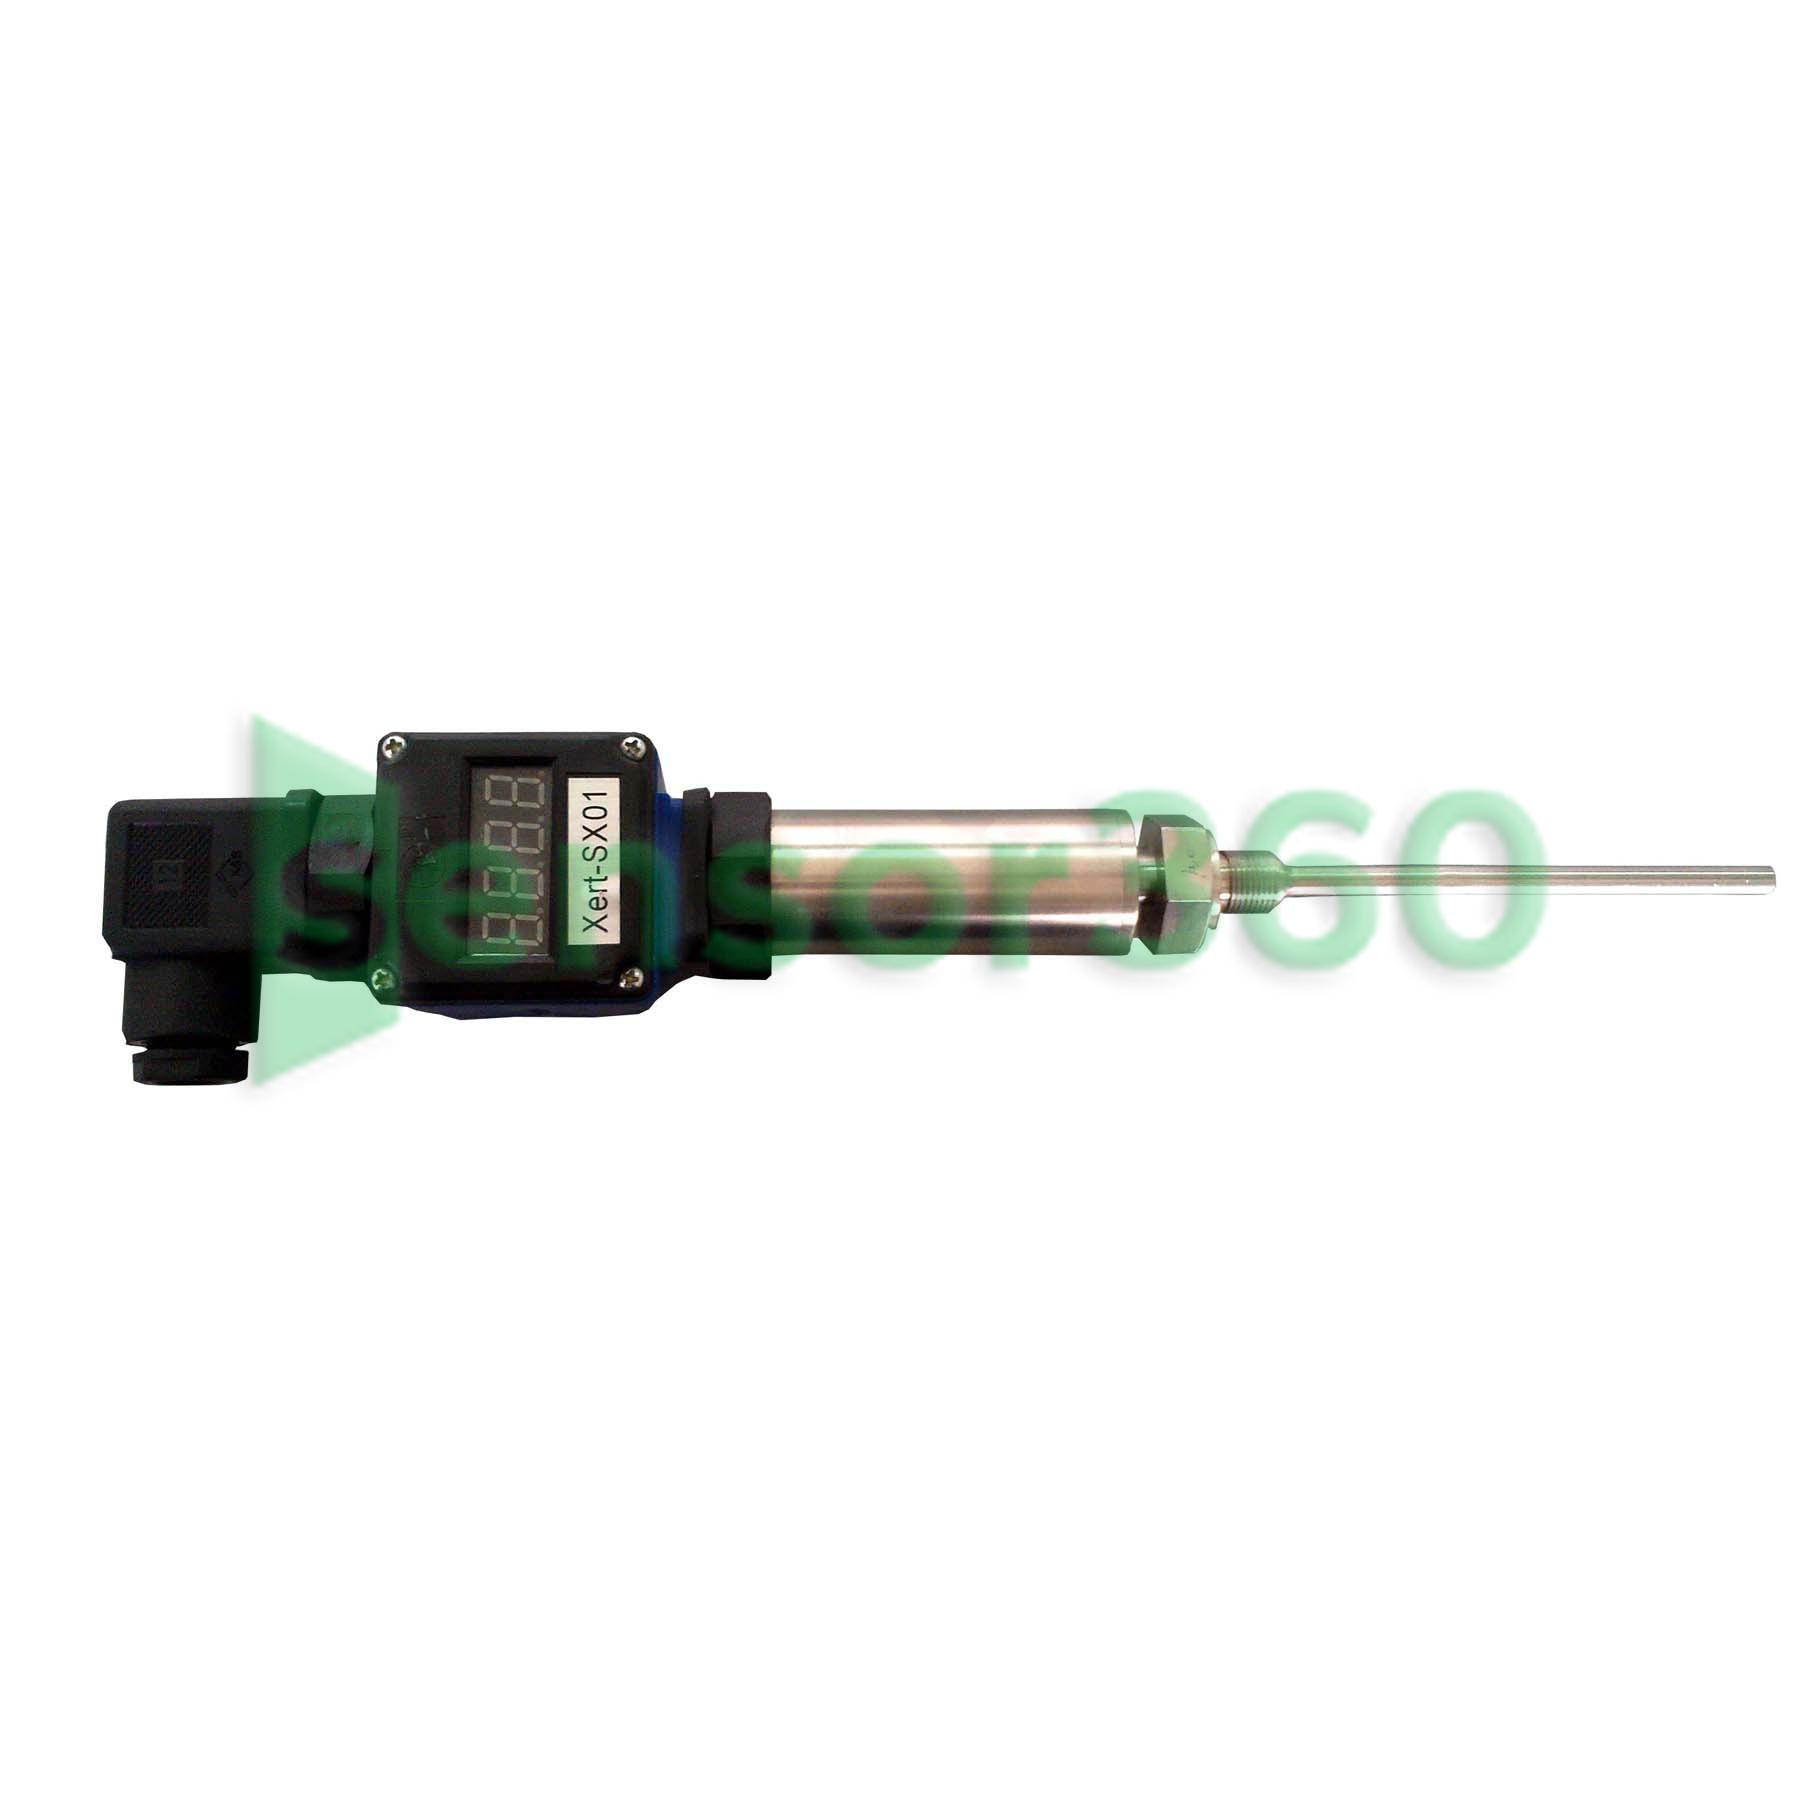 Thermocouple with temperature transmitter (resistance)